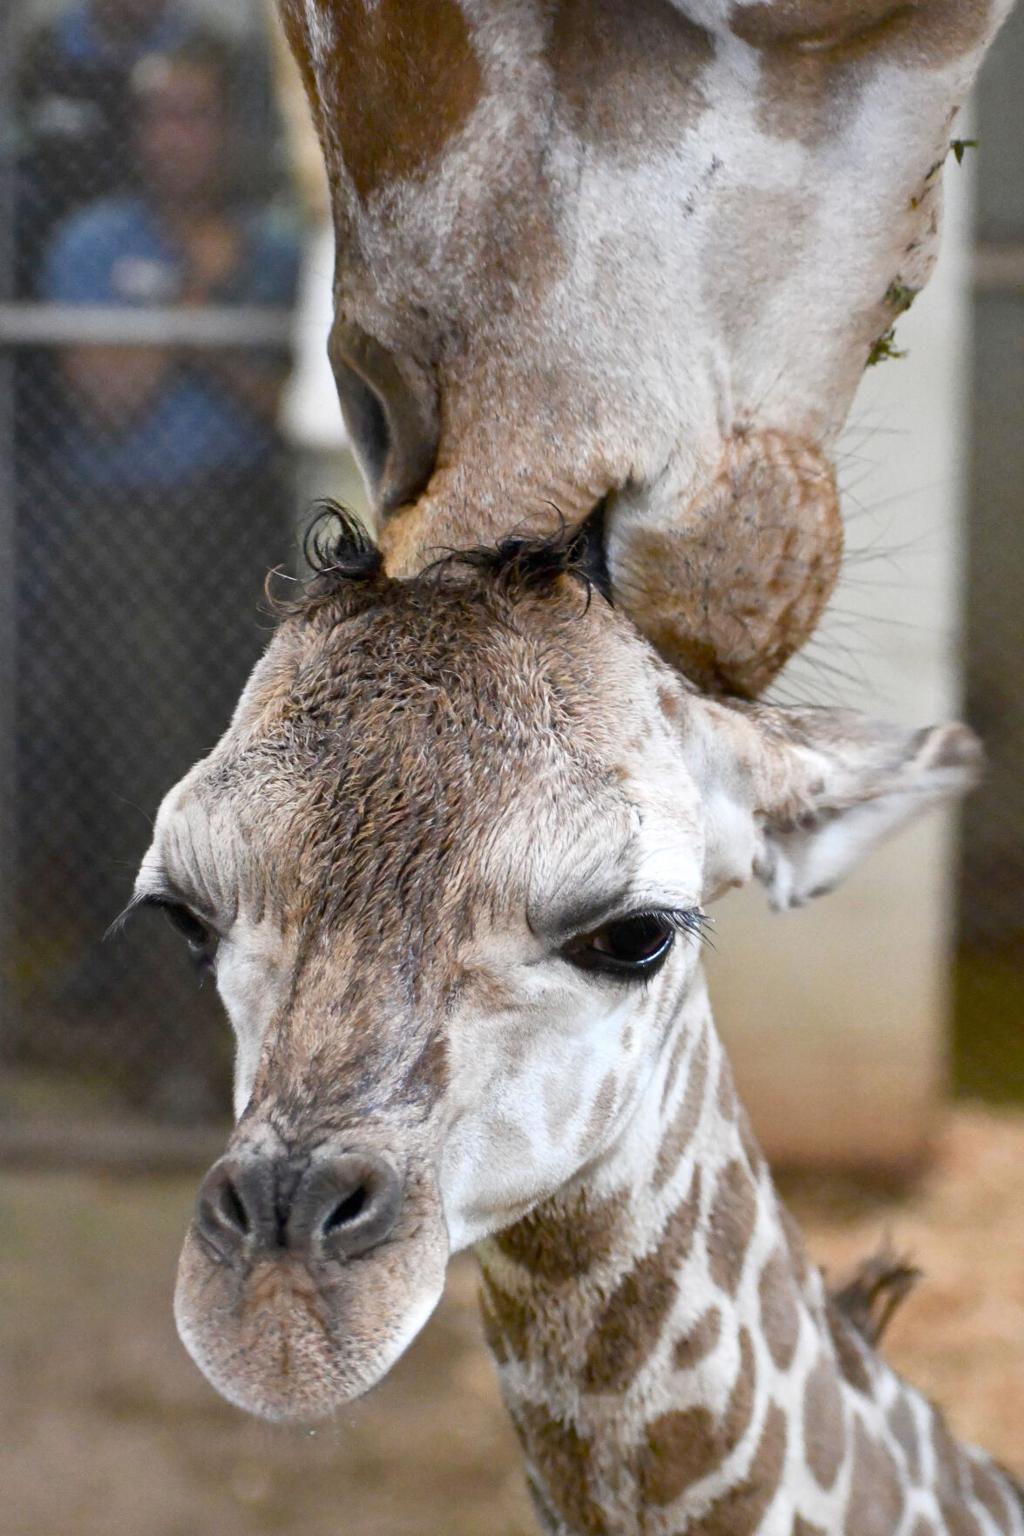 mother and baby giraffe kissing